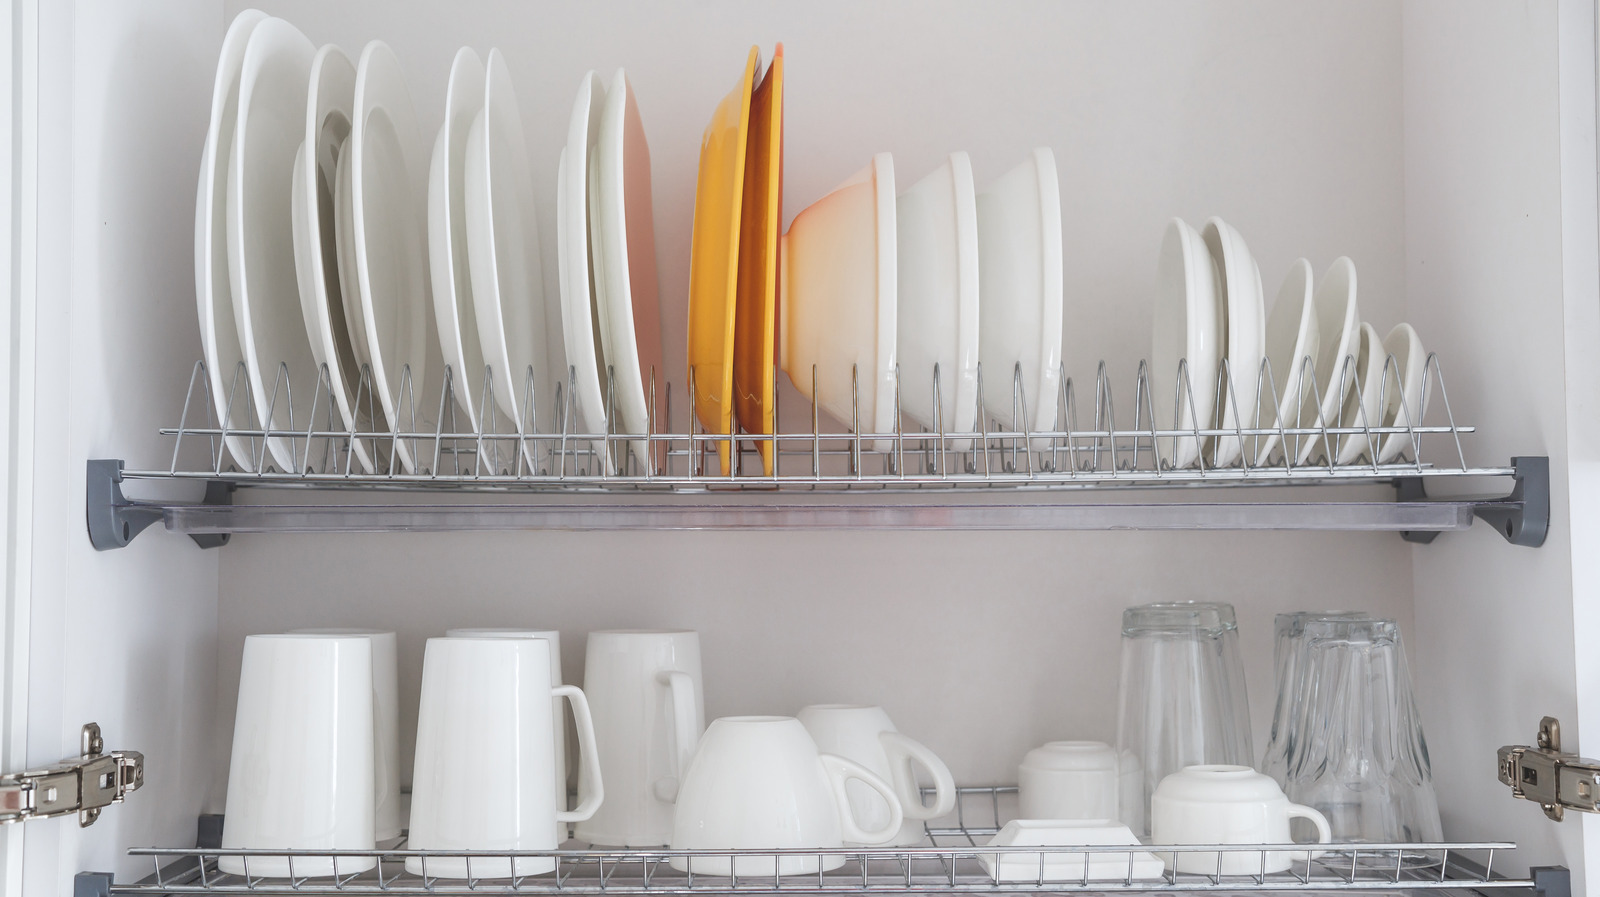 https://www.housedigest.com/img/gallery/the-genius-storage-method-that-dries-your-dishes-at-the-same-time/l-intro-1695422196.jpg